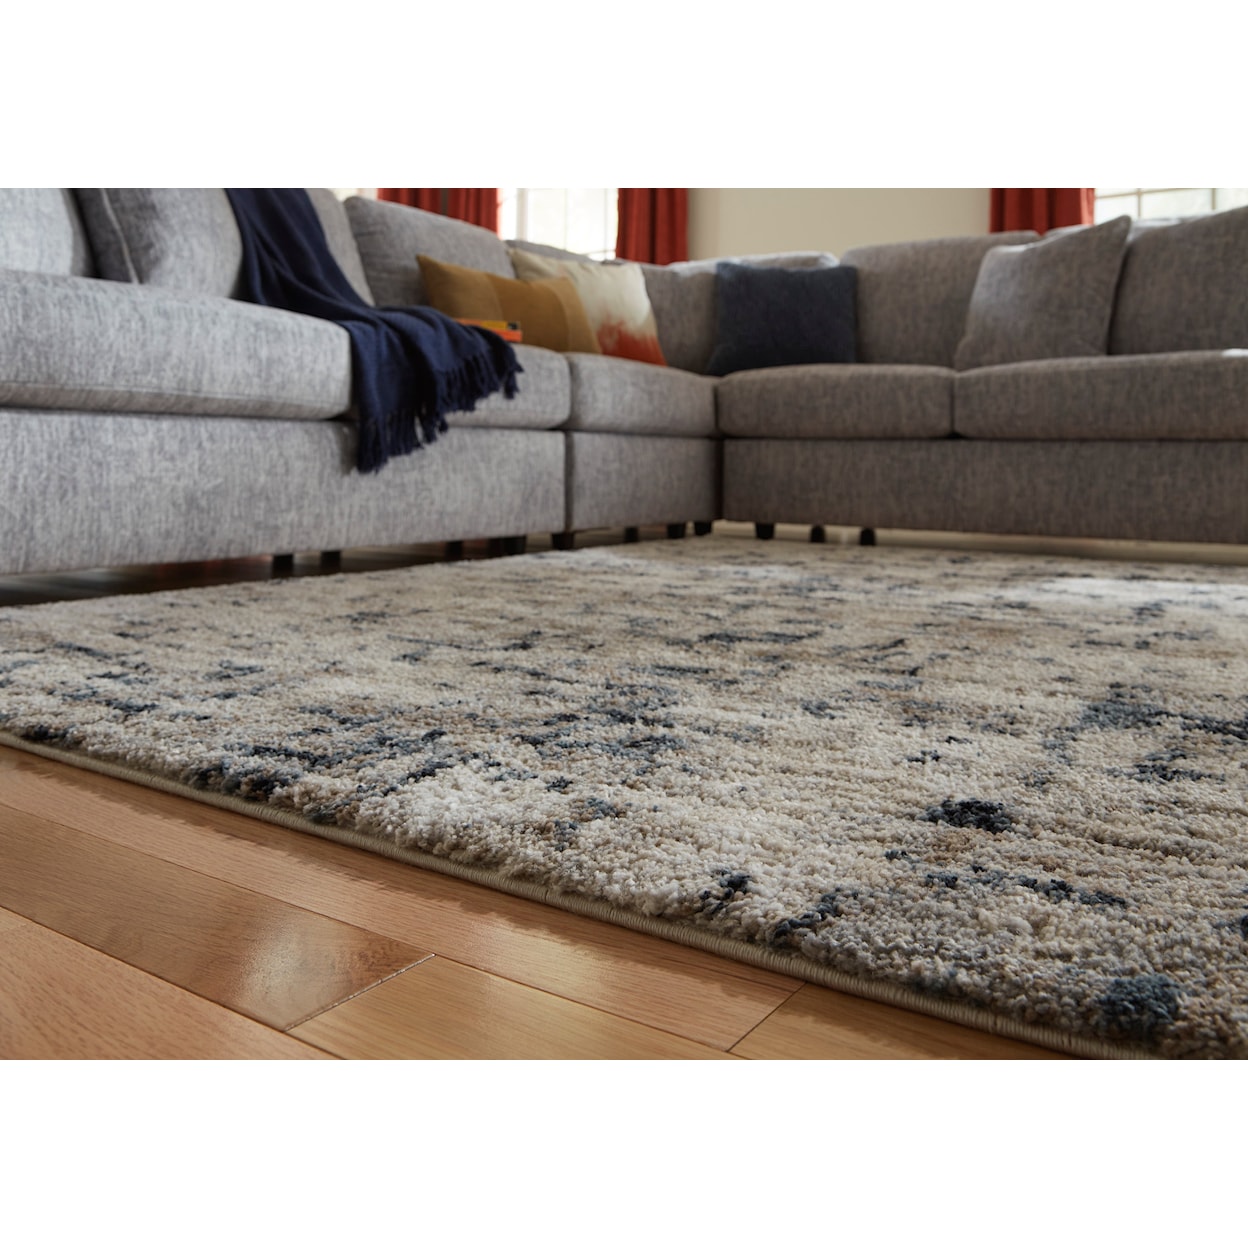 Benchcraft Contemporary Area Rugs Mansville 7'11" x 10' Rug